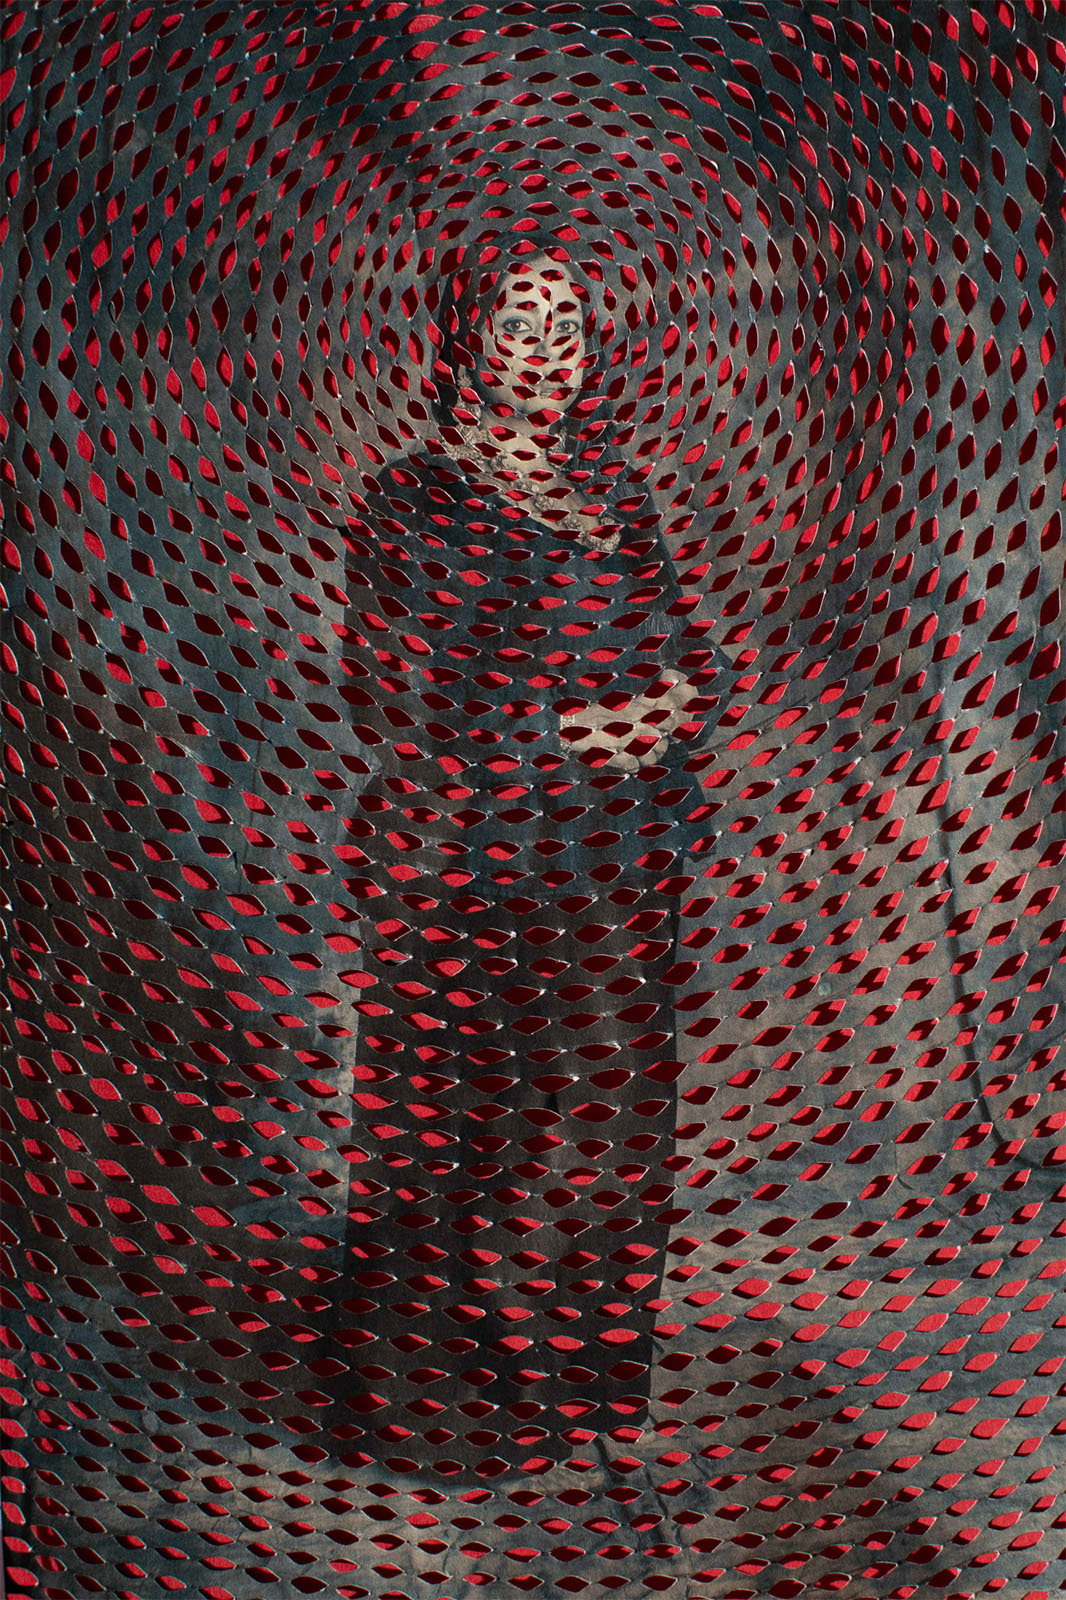 A person stands enveloped in a swirling red and black patterned texture, creating a hypnotic visual effect around their silhouette.